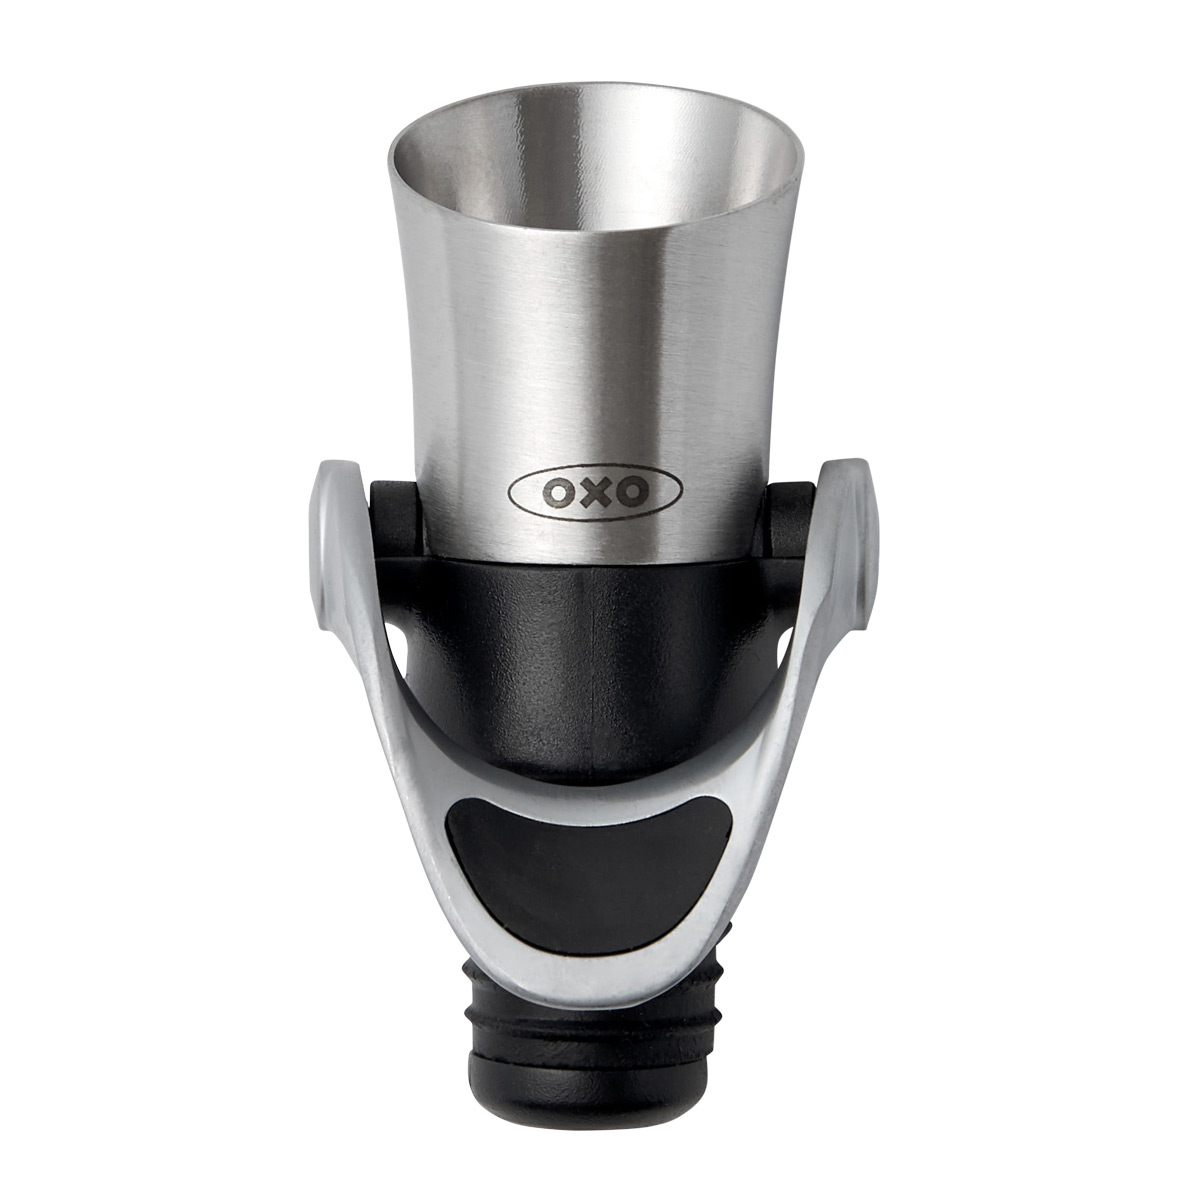 https://www.containerstore.com/catalogimages/428148/10086067-OXO-Wine-Stopper-Pourer-VEN.jpg